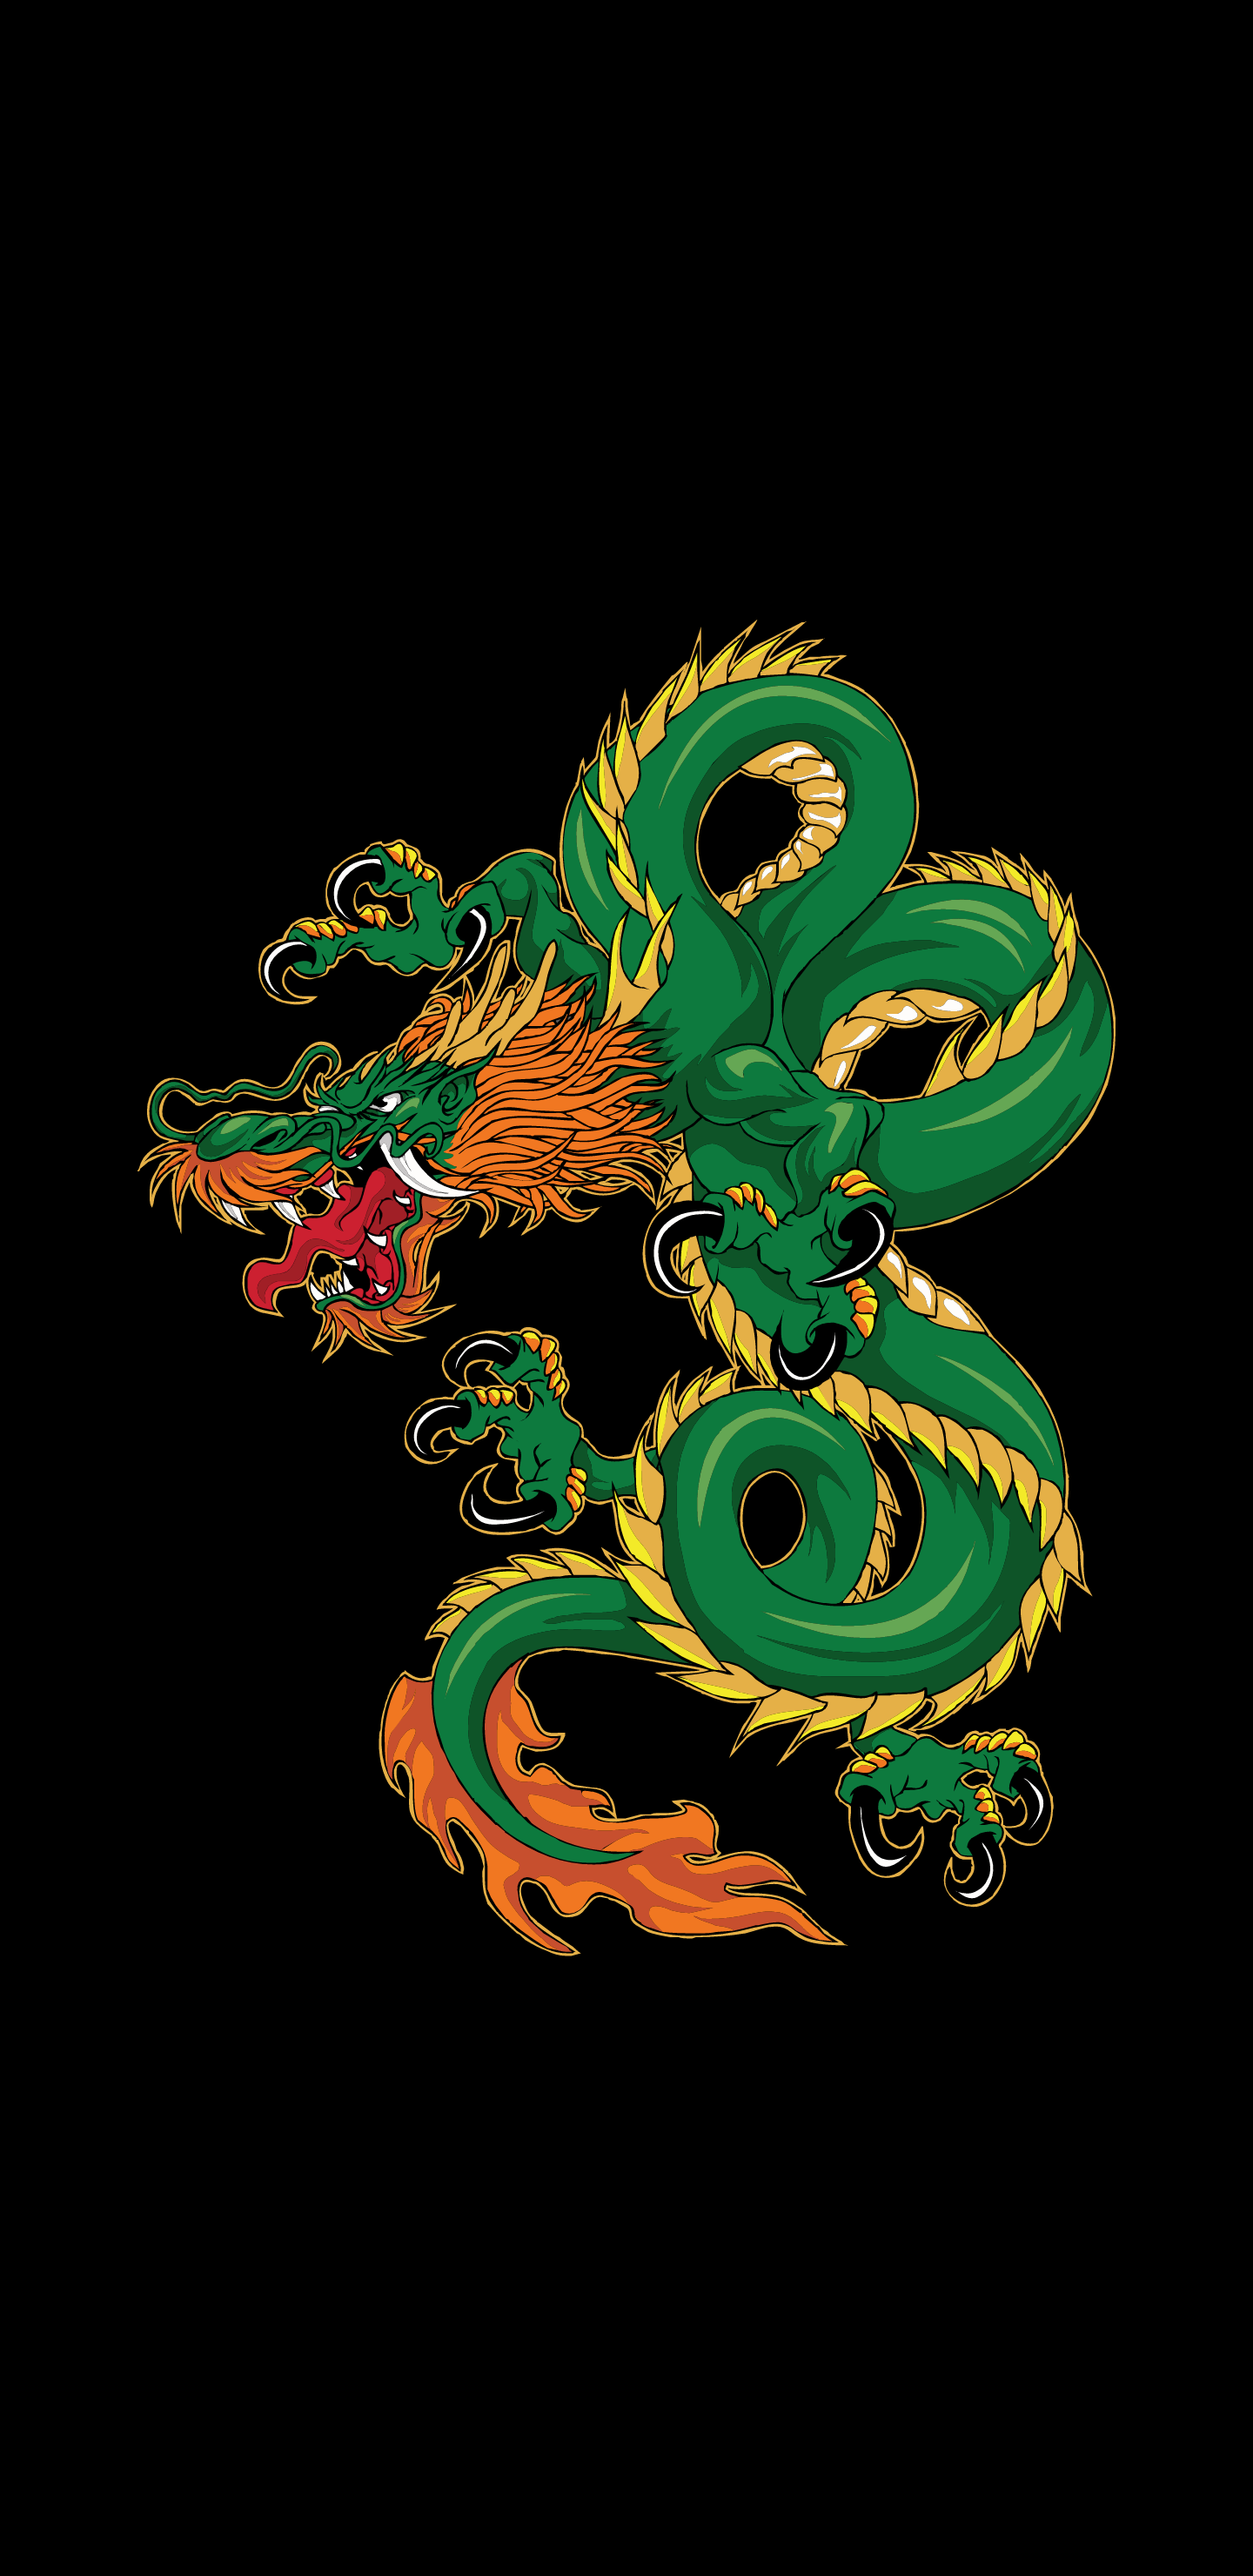 Dragon [1440x2960] wallpaper generated by Colartive (an android wallpaper generator app). Another day, another elegant looking wallpaper. Try your own choice of colors on Dragon. Drive link in the comments for